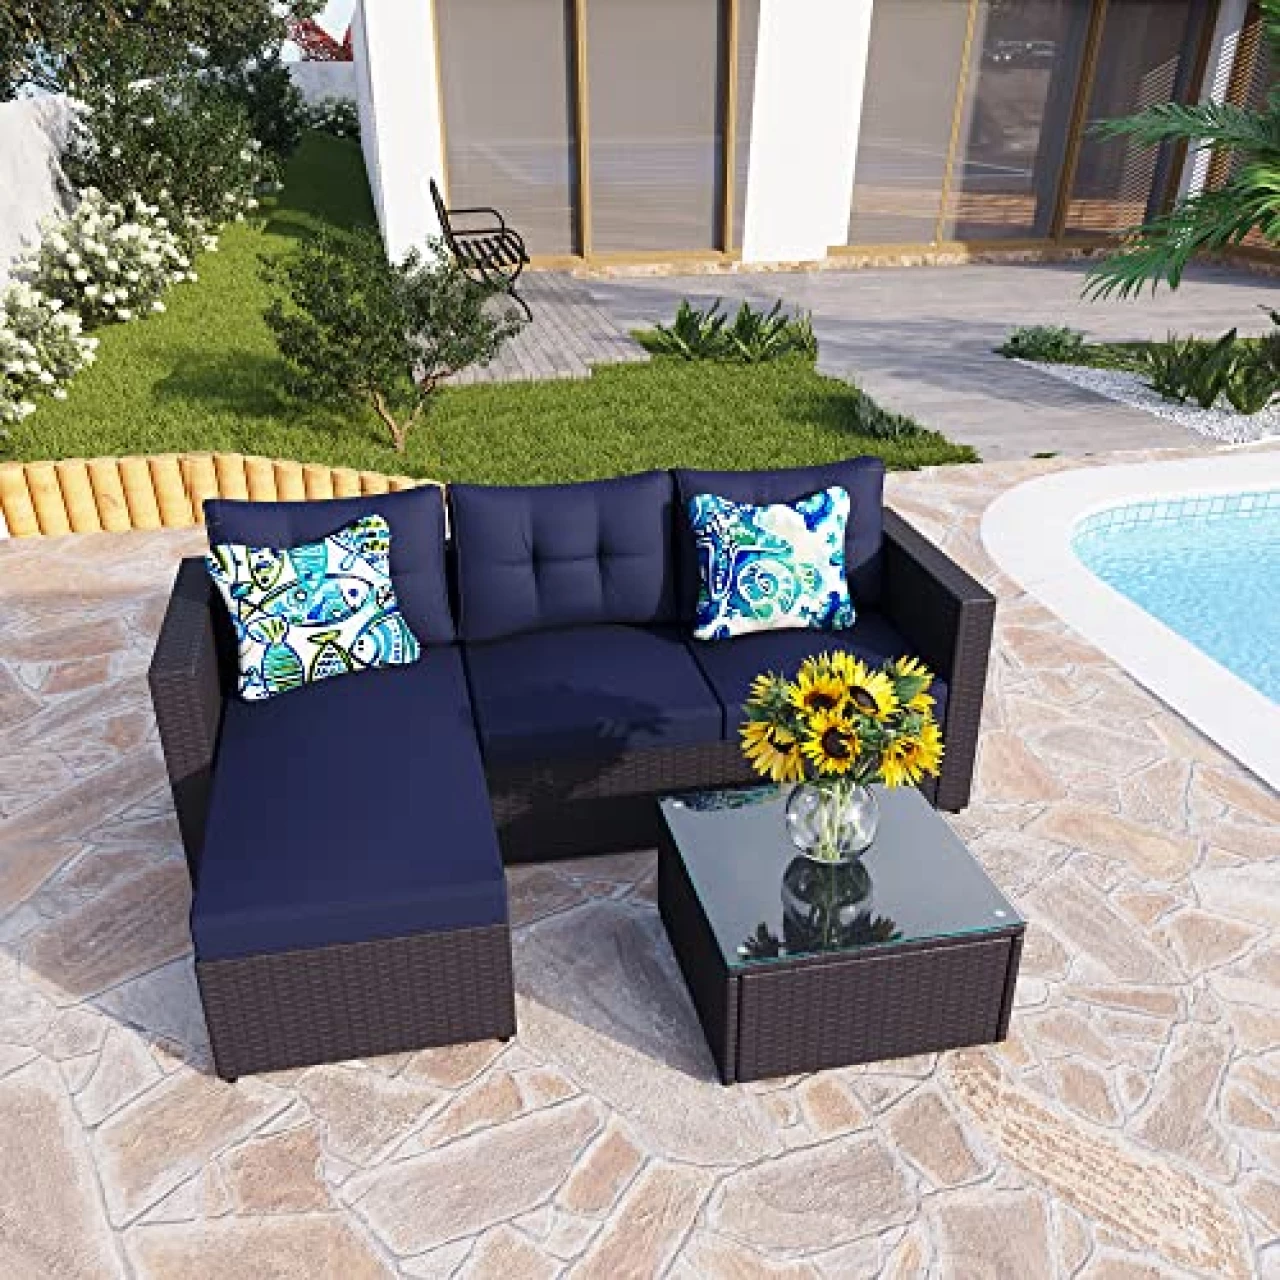 PHI VILLA 77&quot; Wide Outdoor Rattan Sectional Sofa with Cushions - Small Patio Wicker Furniture Set (3 - Person Seating Group, Blue)